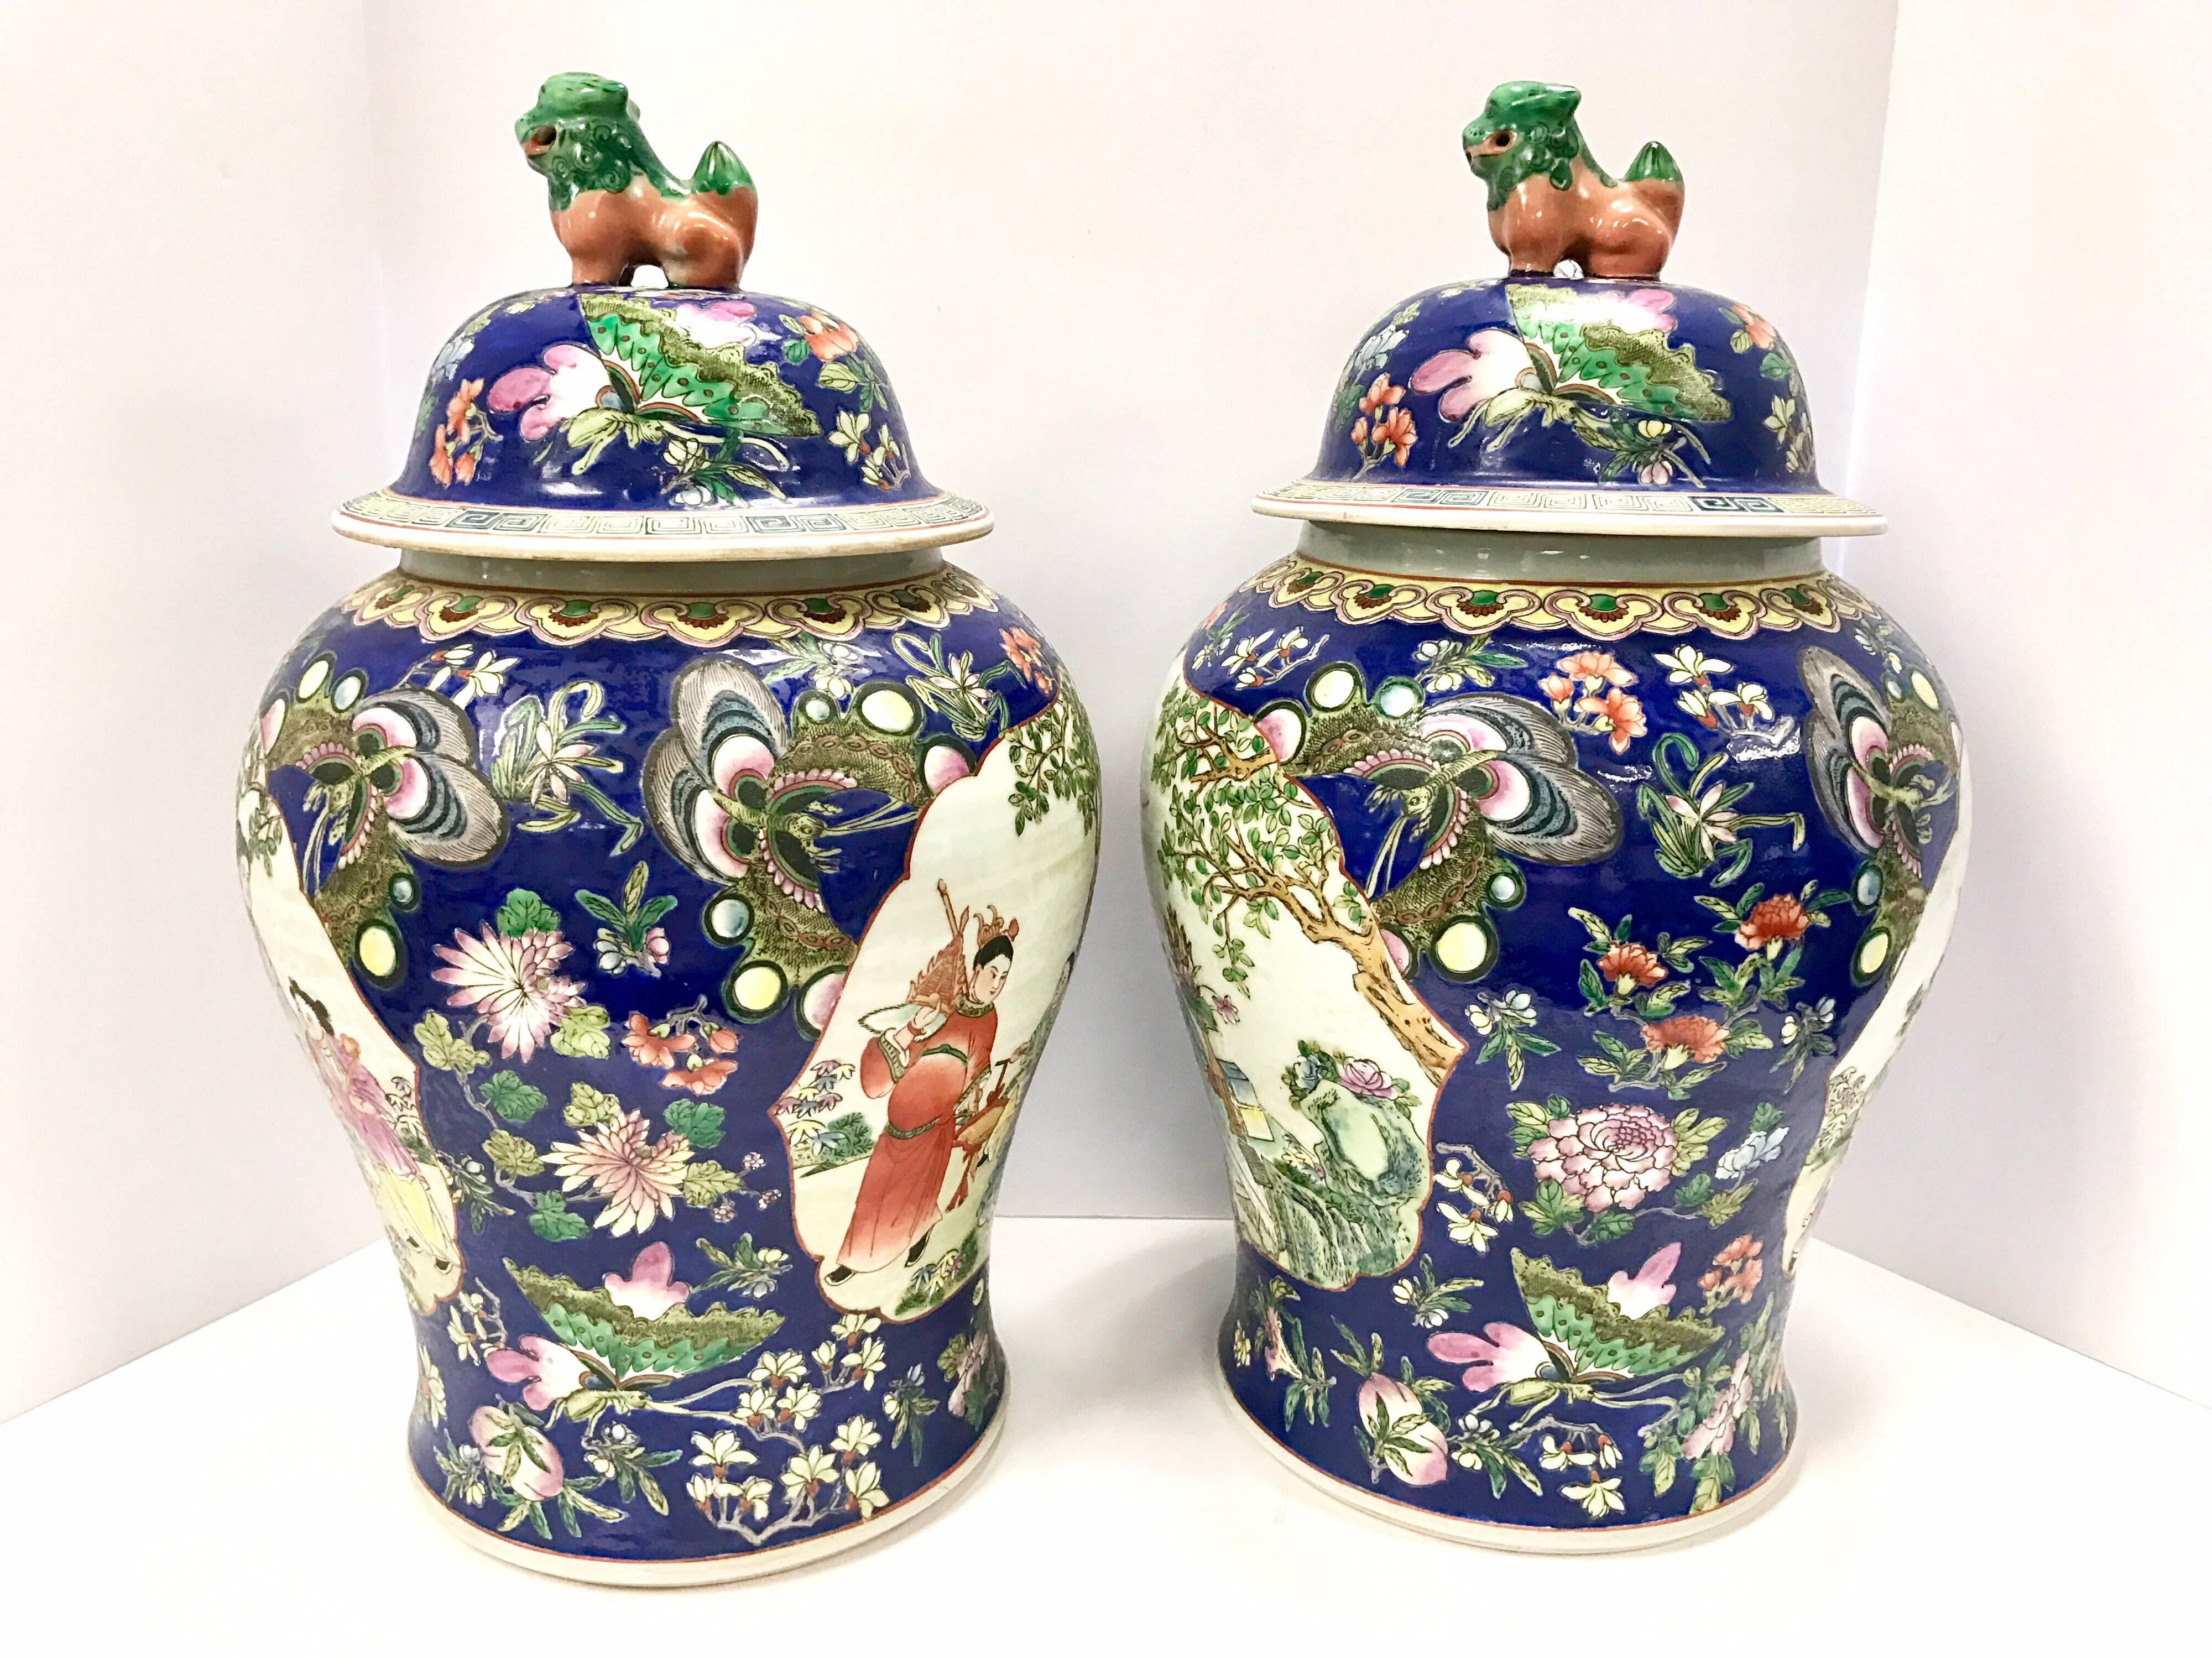 Elegant pair of large blue Chinese urns with foo dogs and vibrant colors.